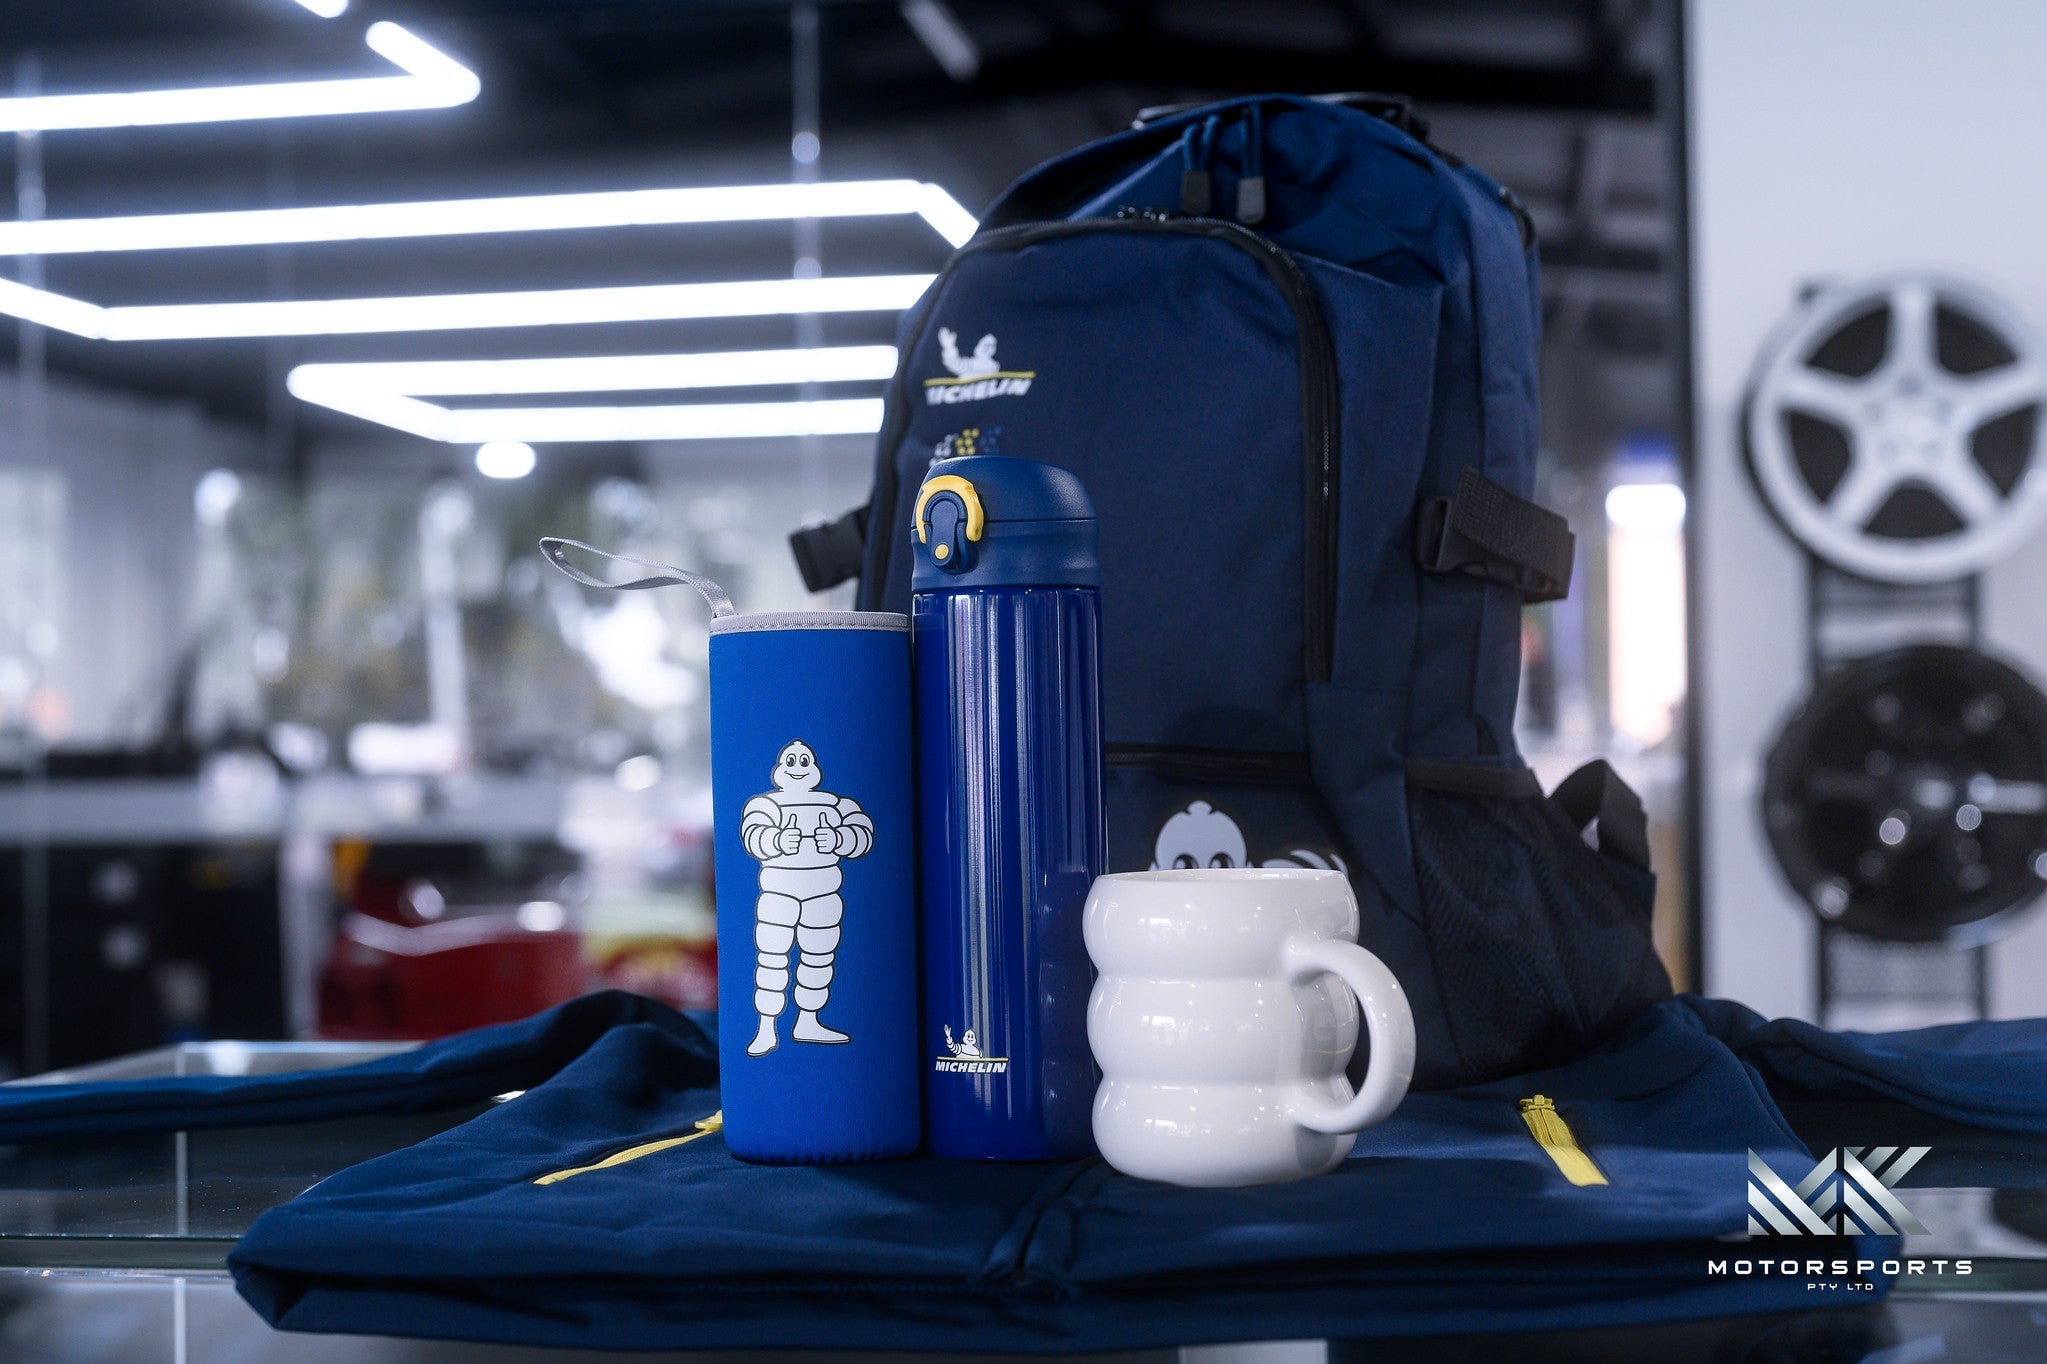 Michelin Thermal Mug With Protector - Premium Merchandise from Merch - From just $49.99! Shop now at MK MOTORSPORTS